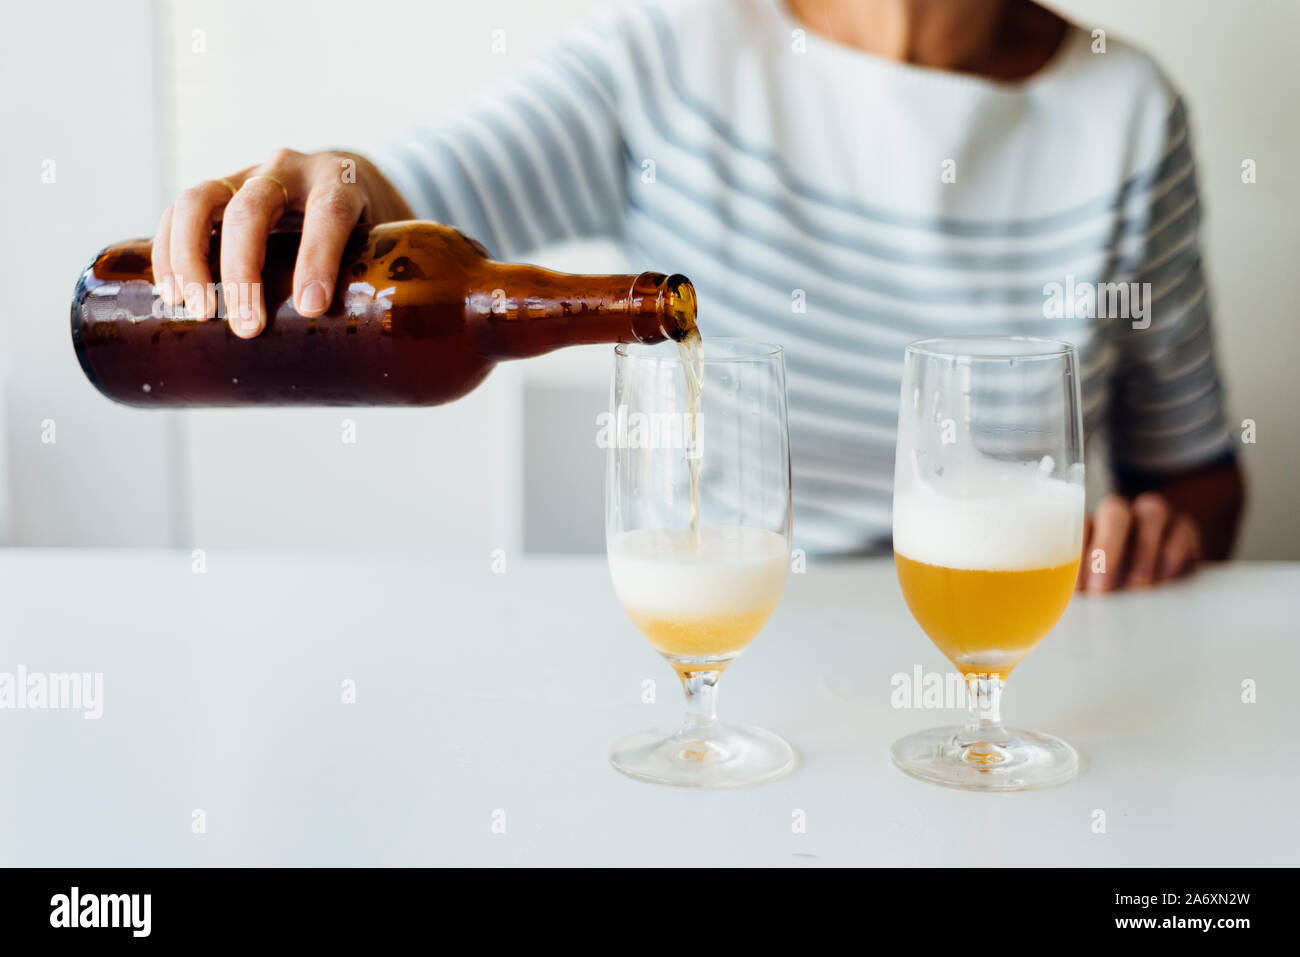 Woman pouring a refreshing beer in a glass. Stock Photo